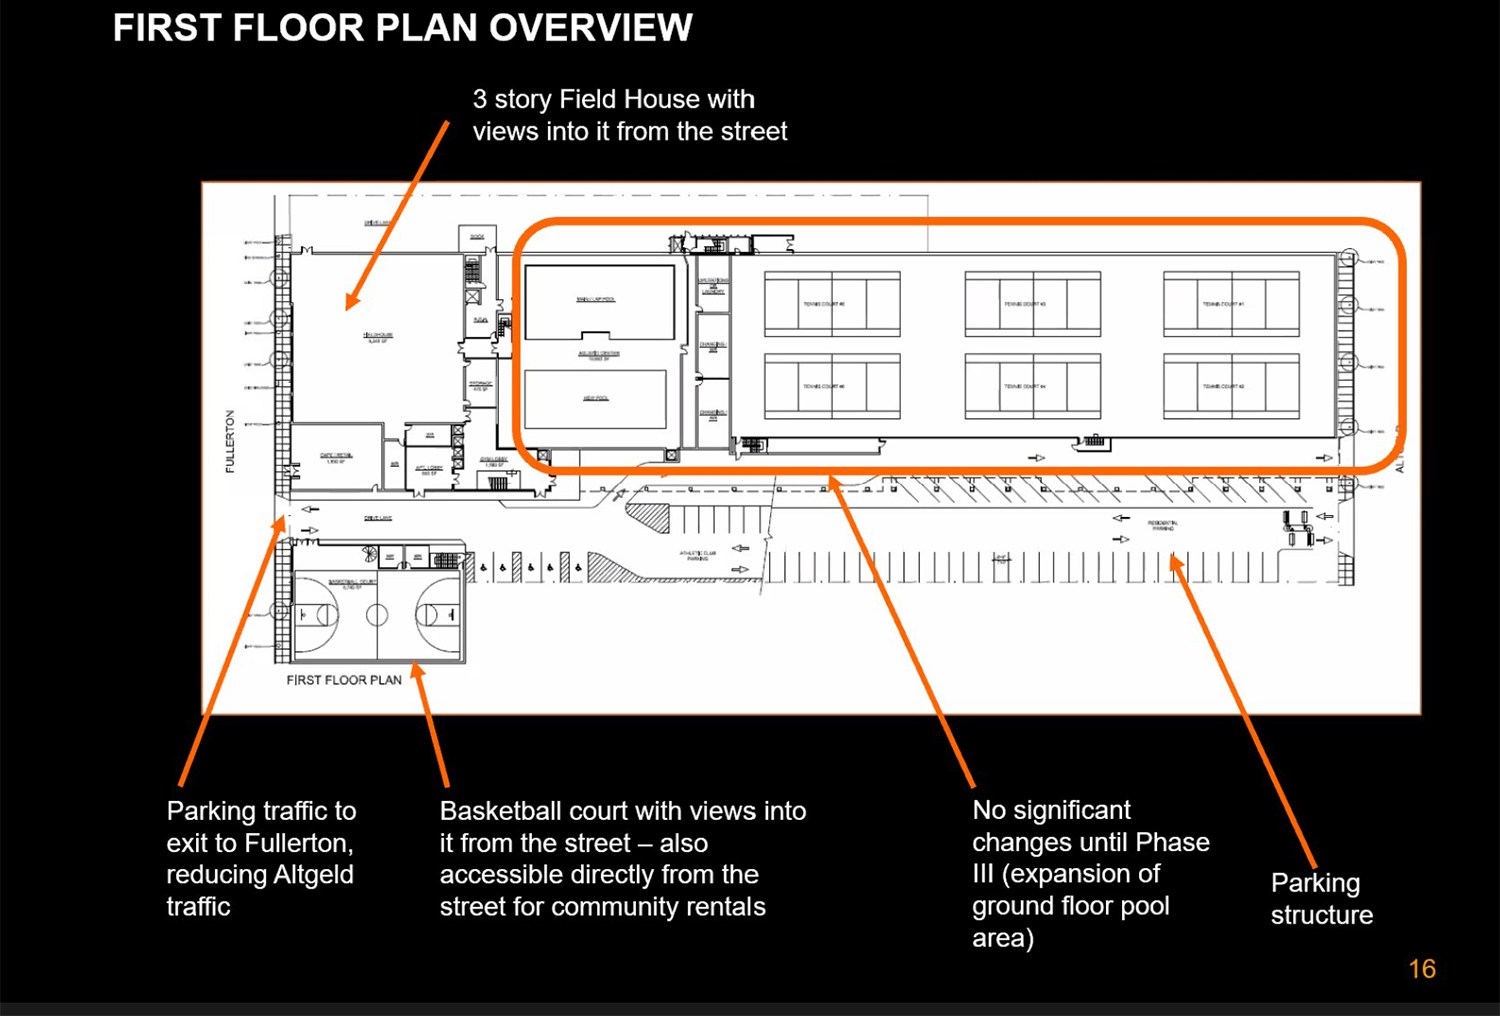 Ground Floor Plan for 1320 W Fullerton Avenue. Drawing by Hammersley Architecture